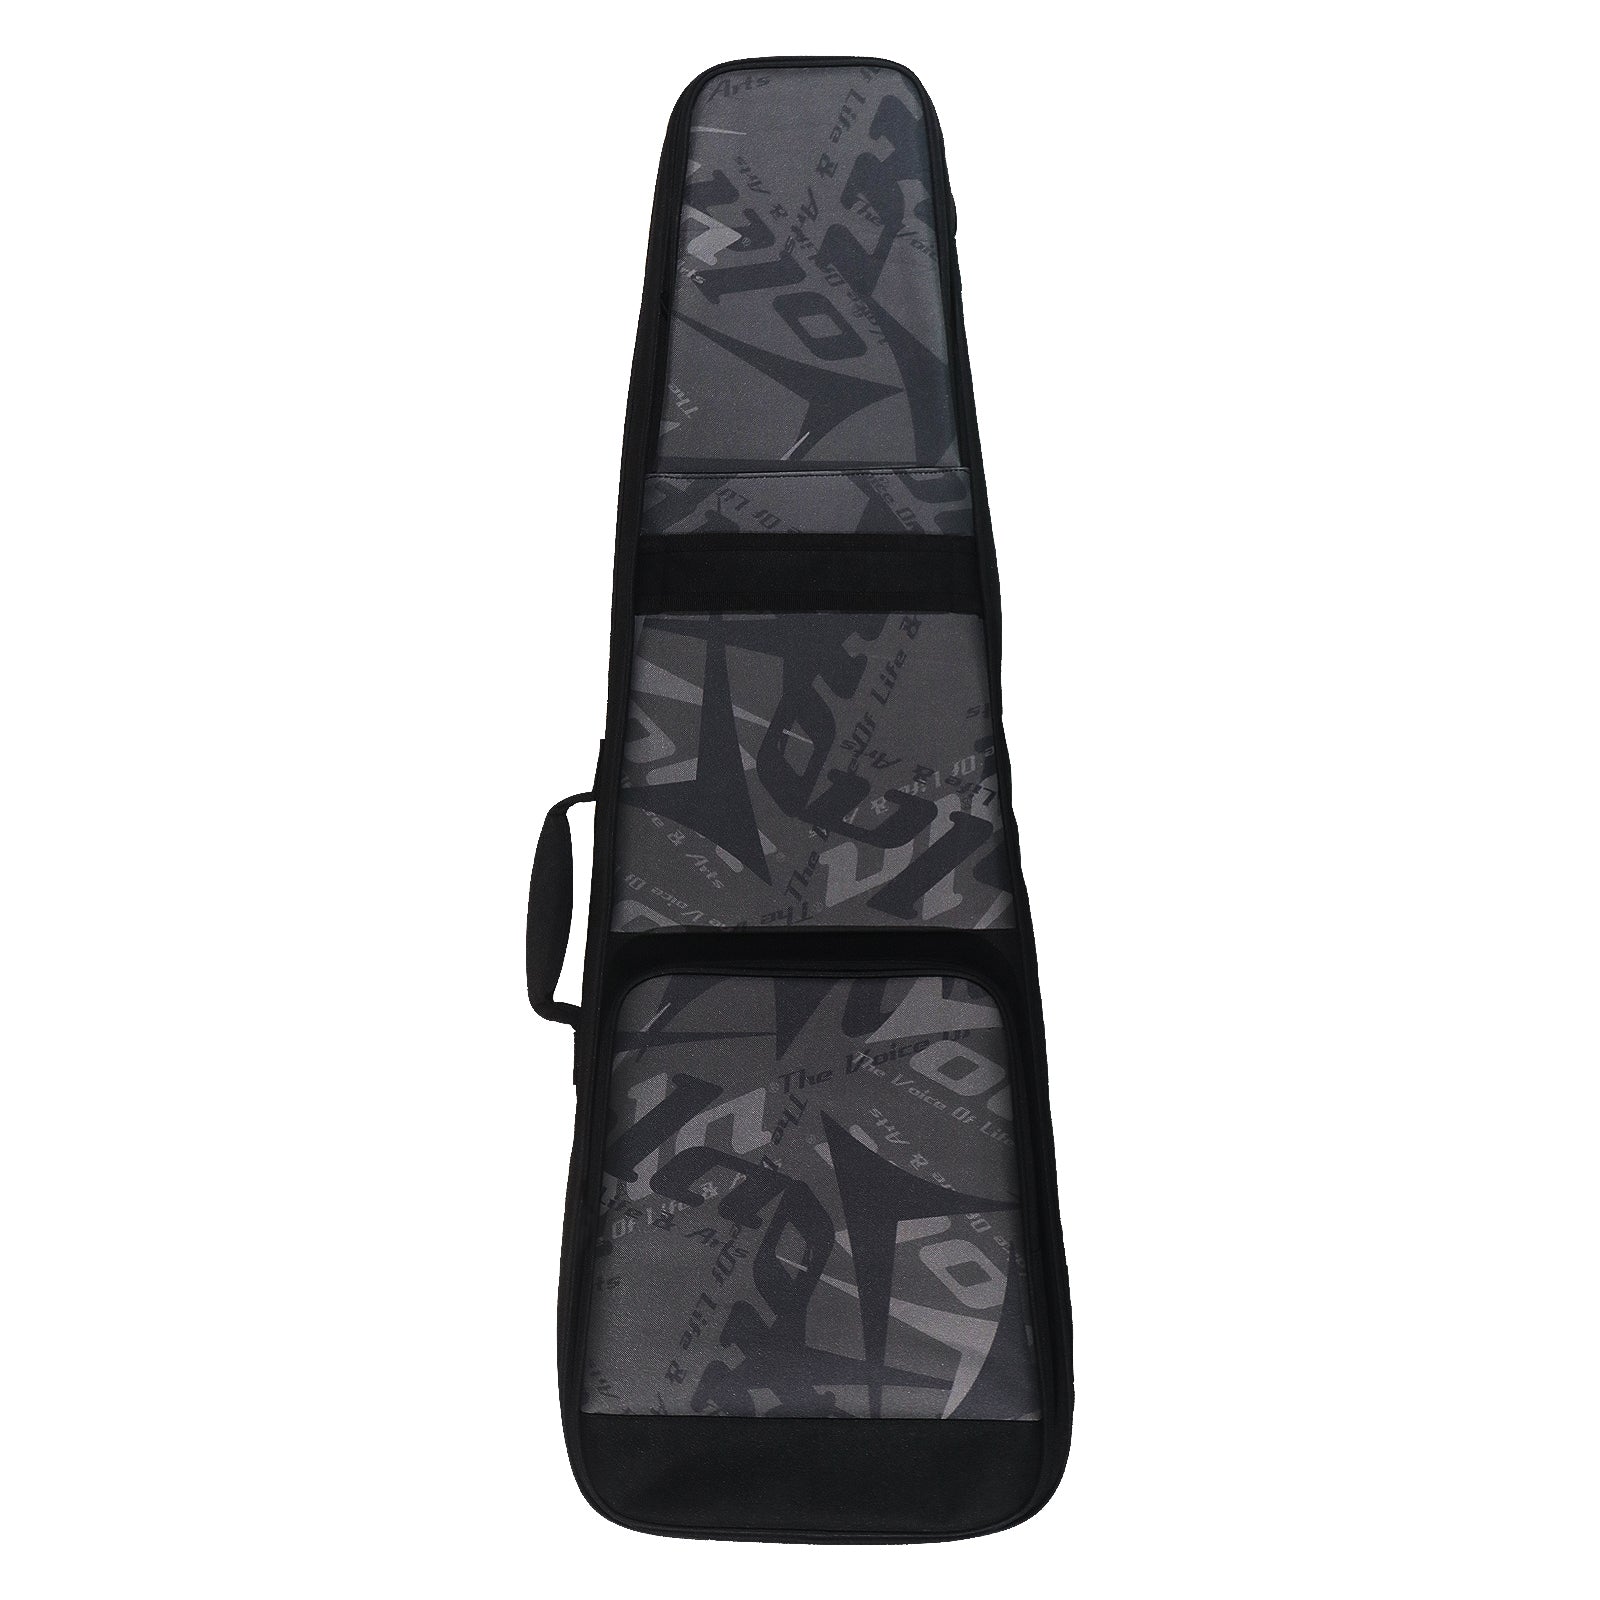 Included is a Vola Deluxe Gig Bag, providing lightweight travel protection from practice to your next headlining gig.